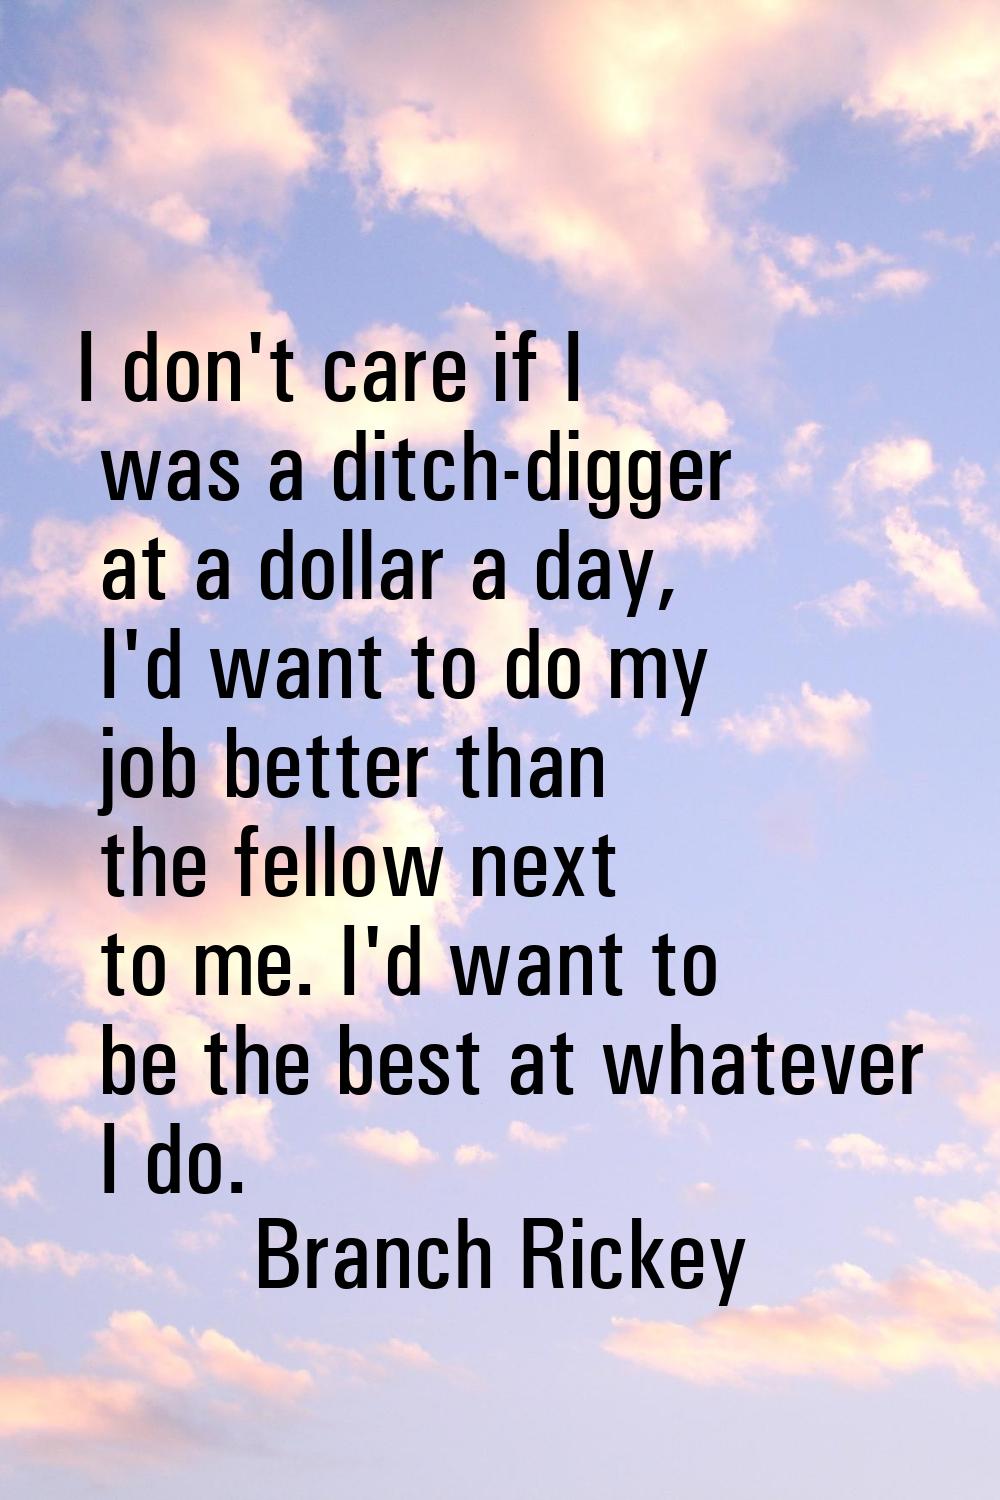 I don't care if I was a ditch-digger at a dollar a day, I'd want to do my job better than the fello